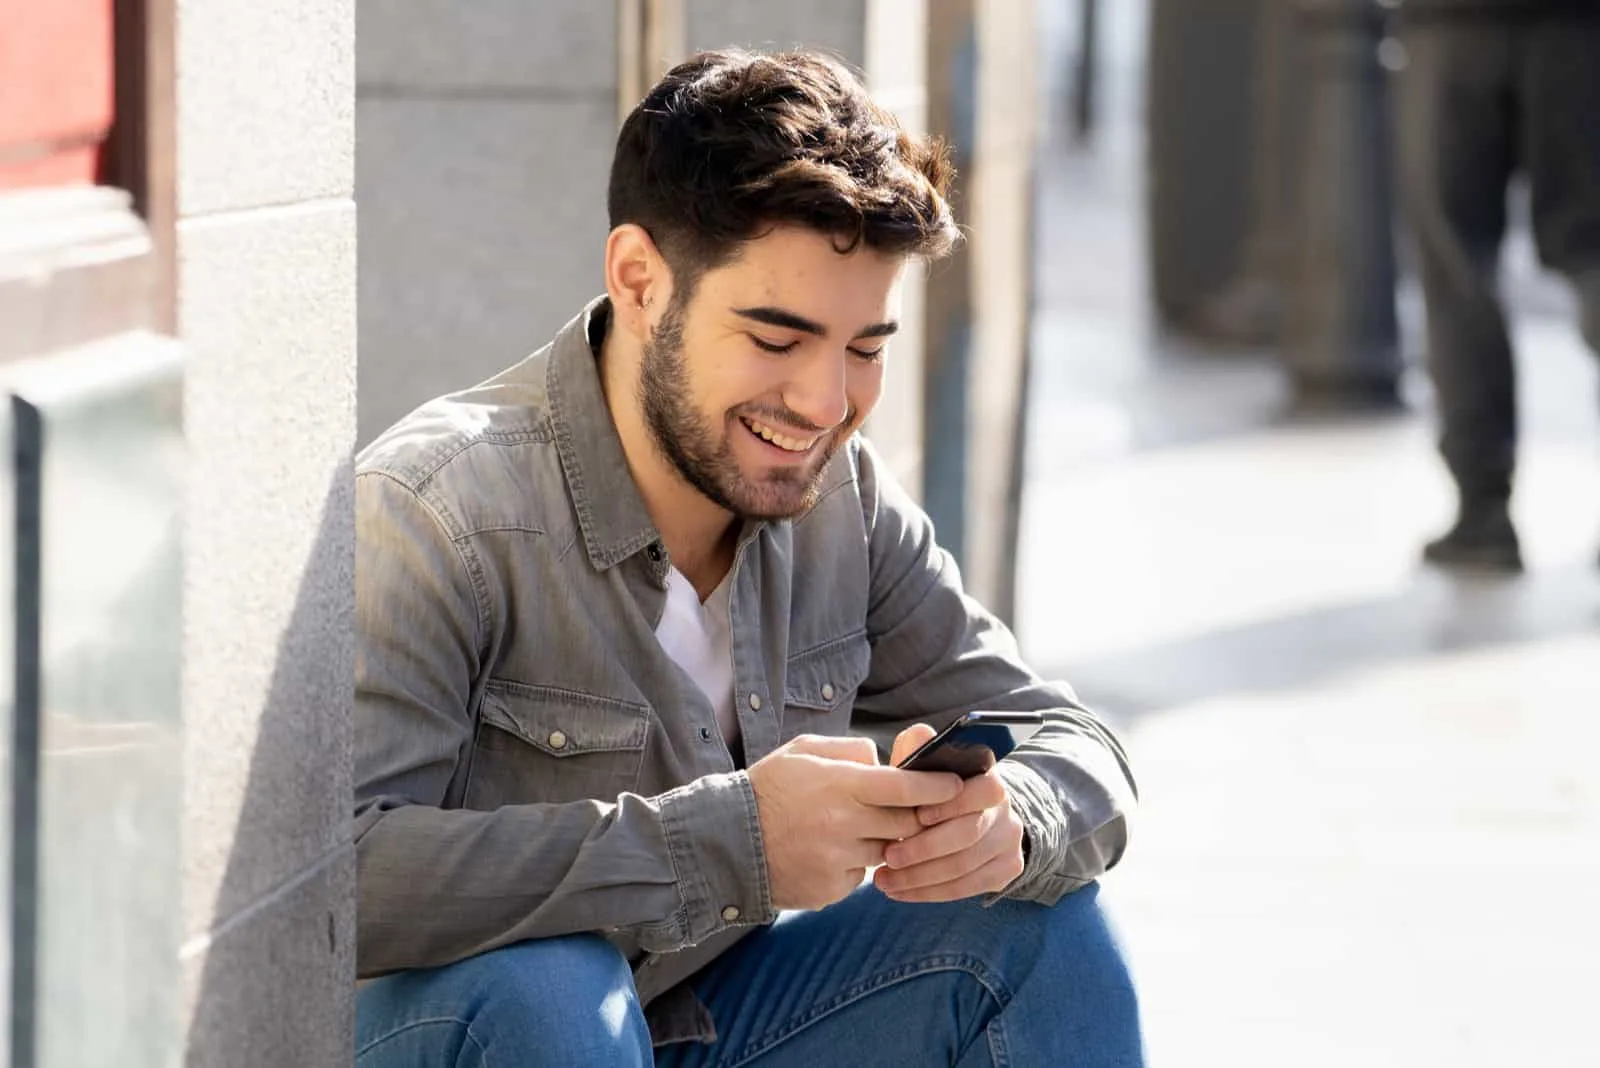 a smiling man sits on the stairs and buttons on the phone